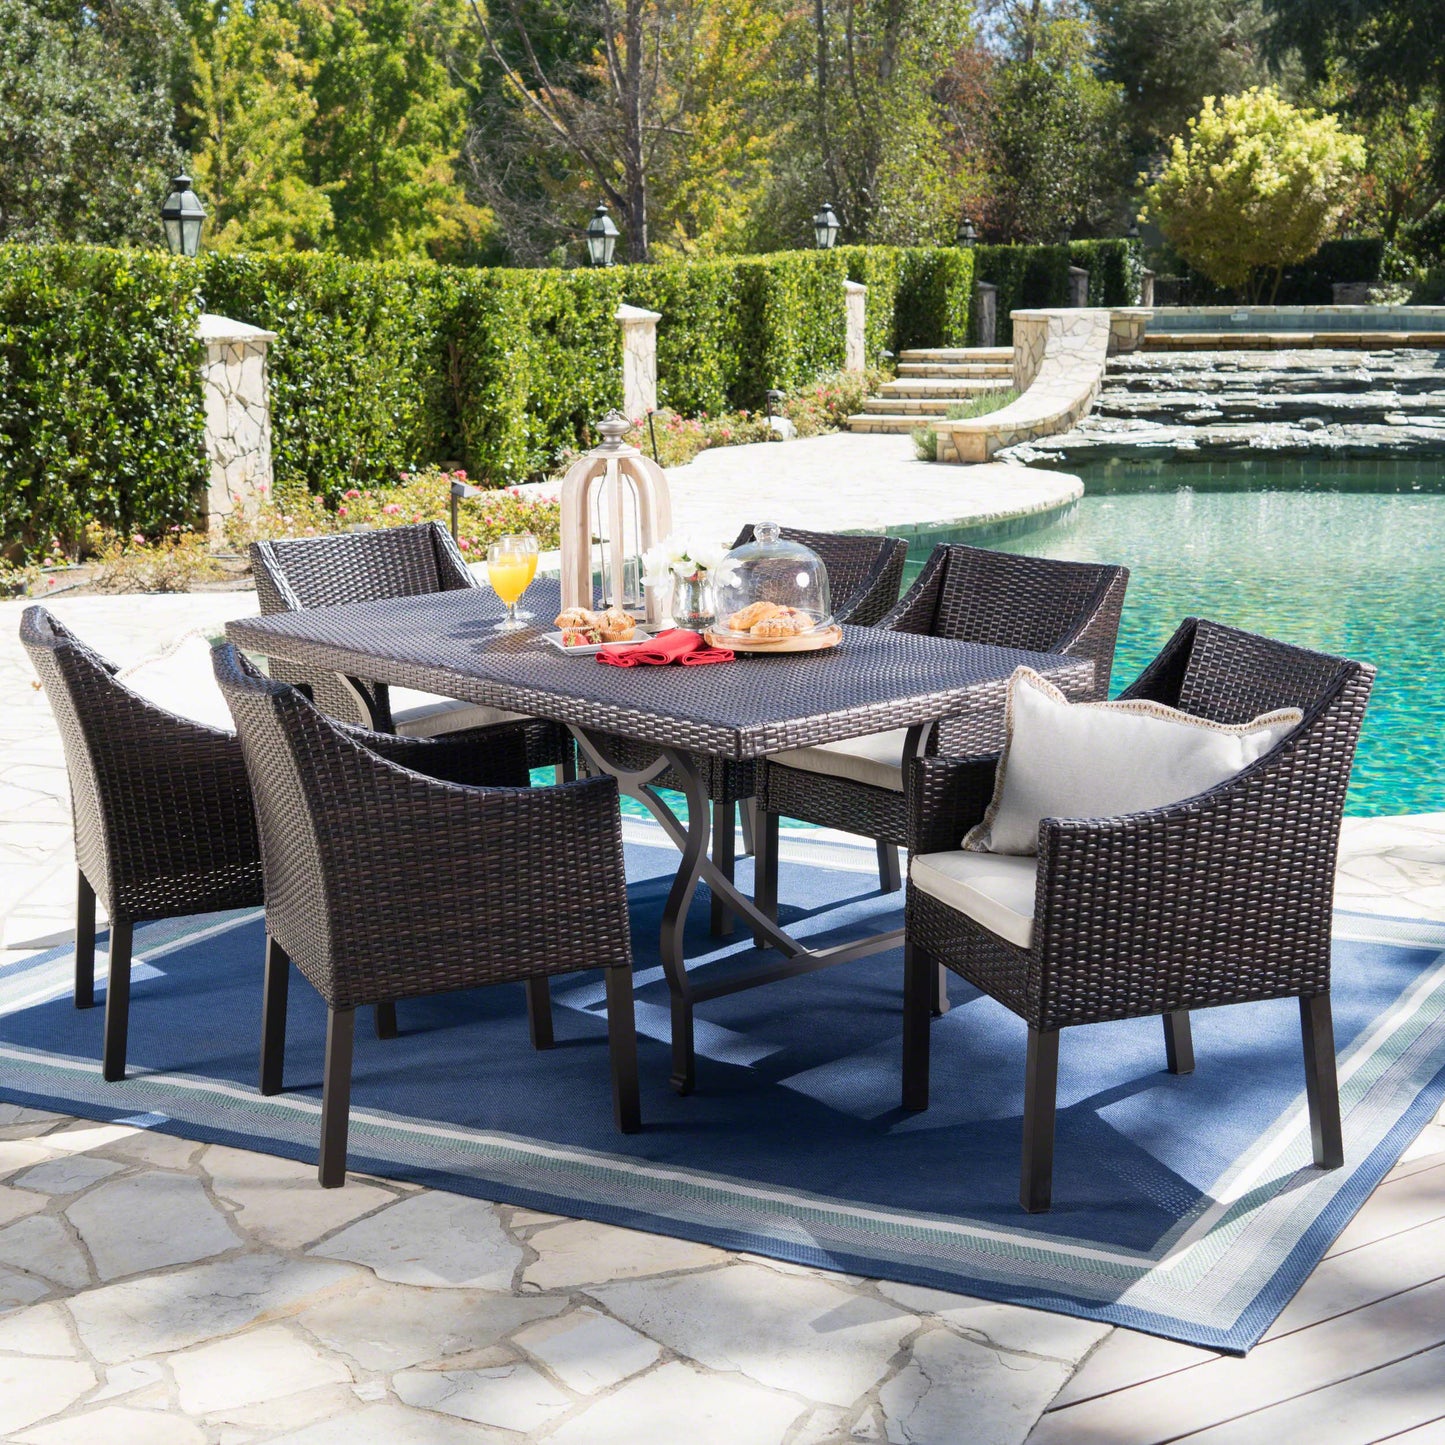 Azore Outdoor 7 Piece Wicker Dining Set with Aluminum Framed Dining Table